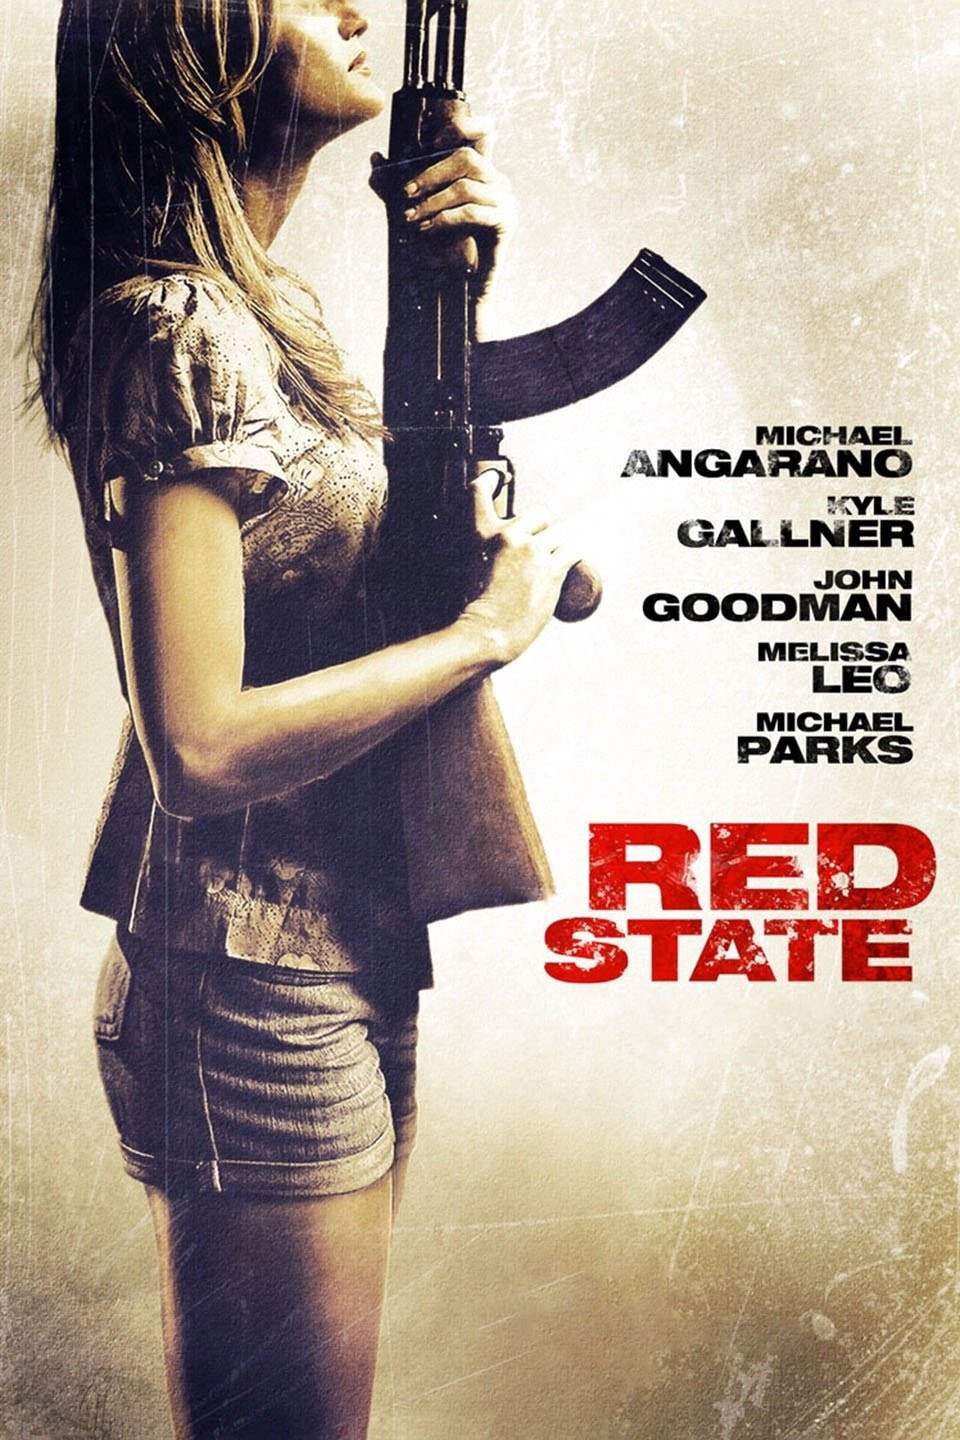 Red State [HD] (2011)